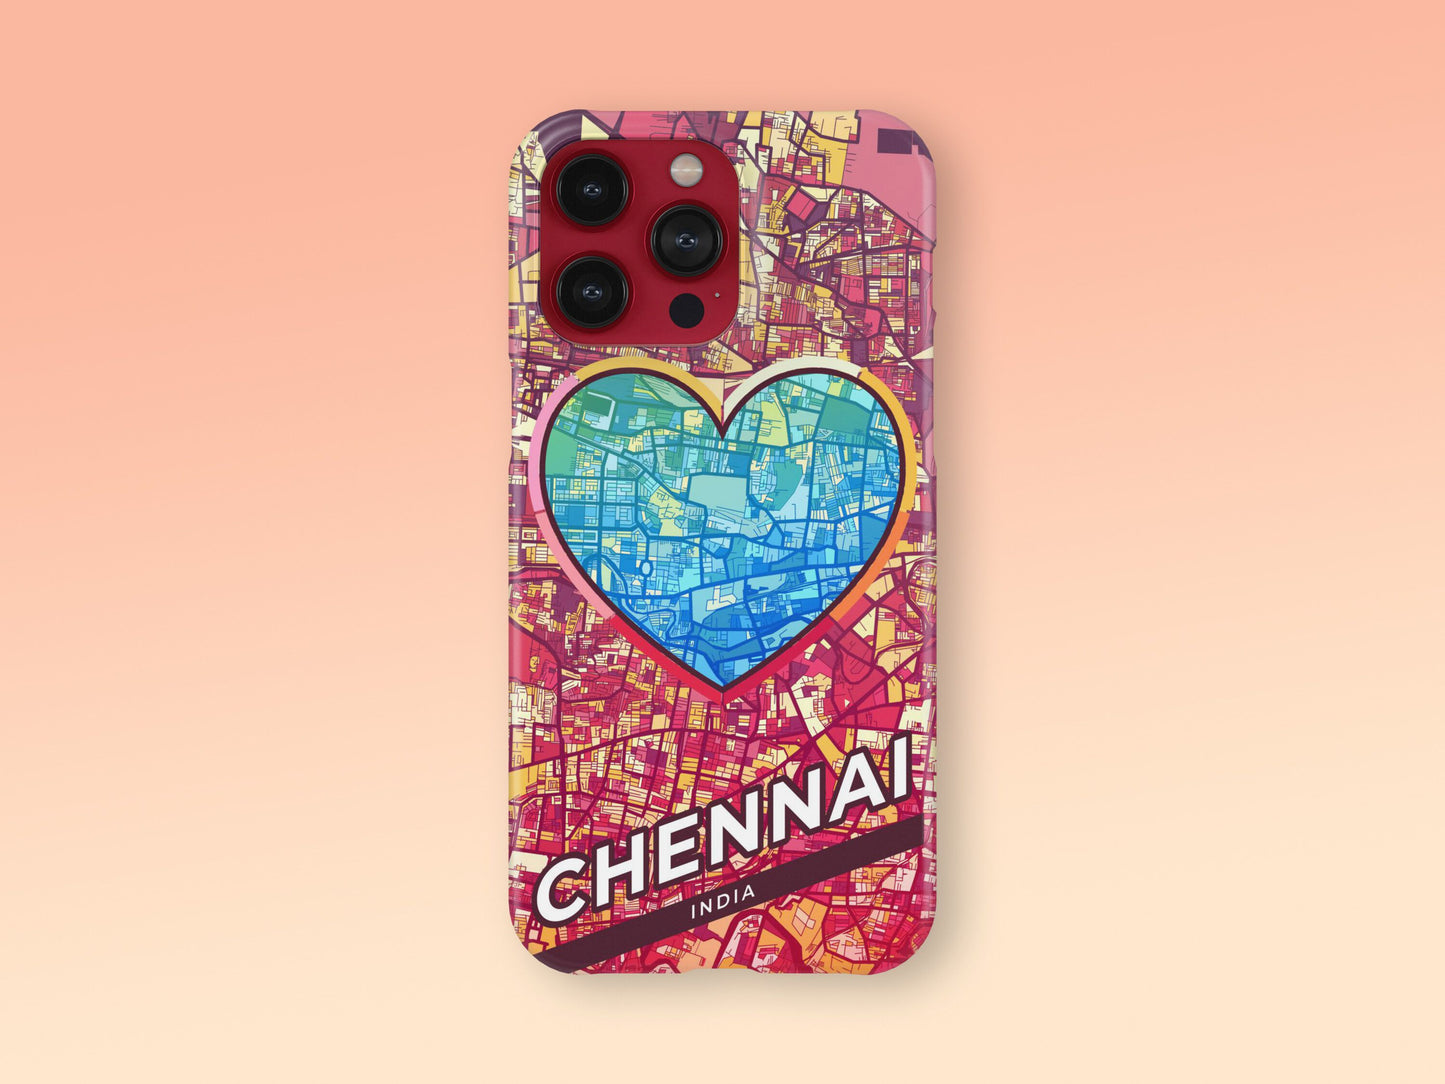 Chennai India slim phone case with colorful icon. Birthday, wedding or housewarming gift. Couple match cases. 2